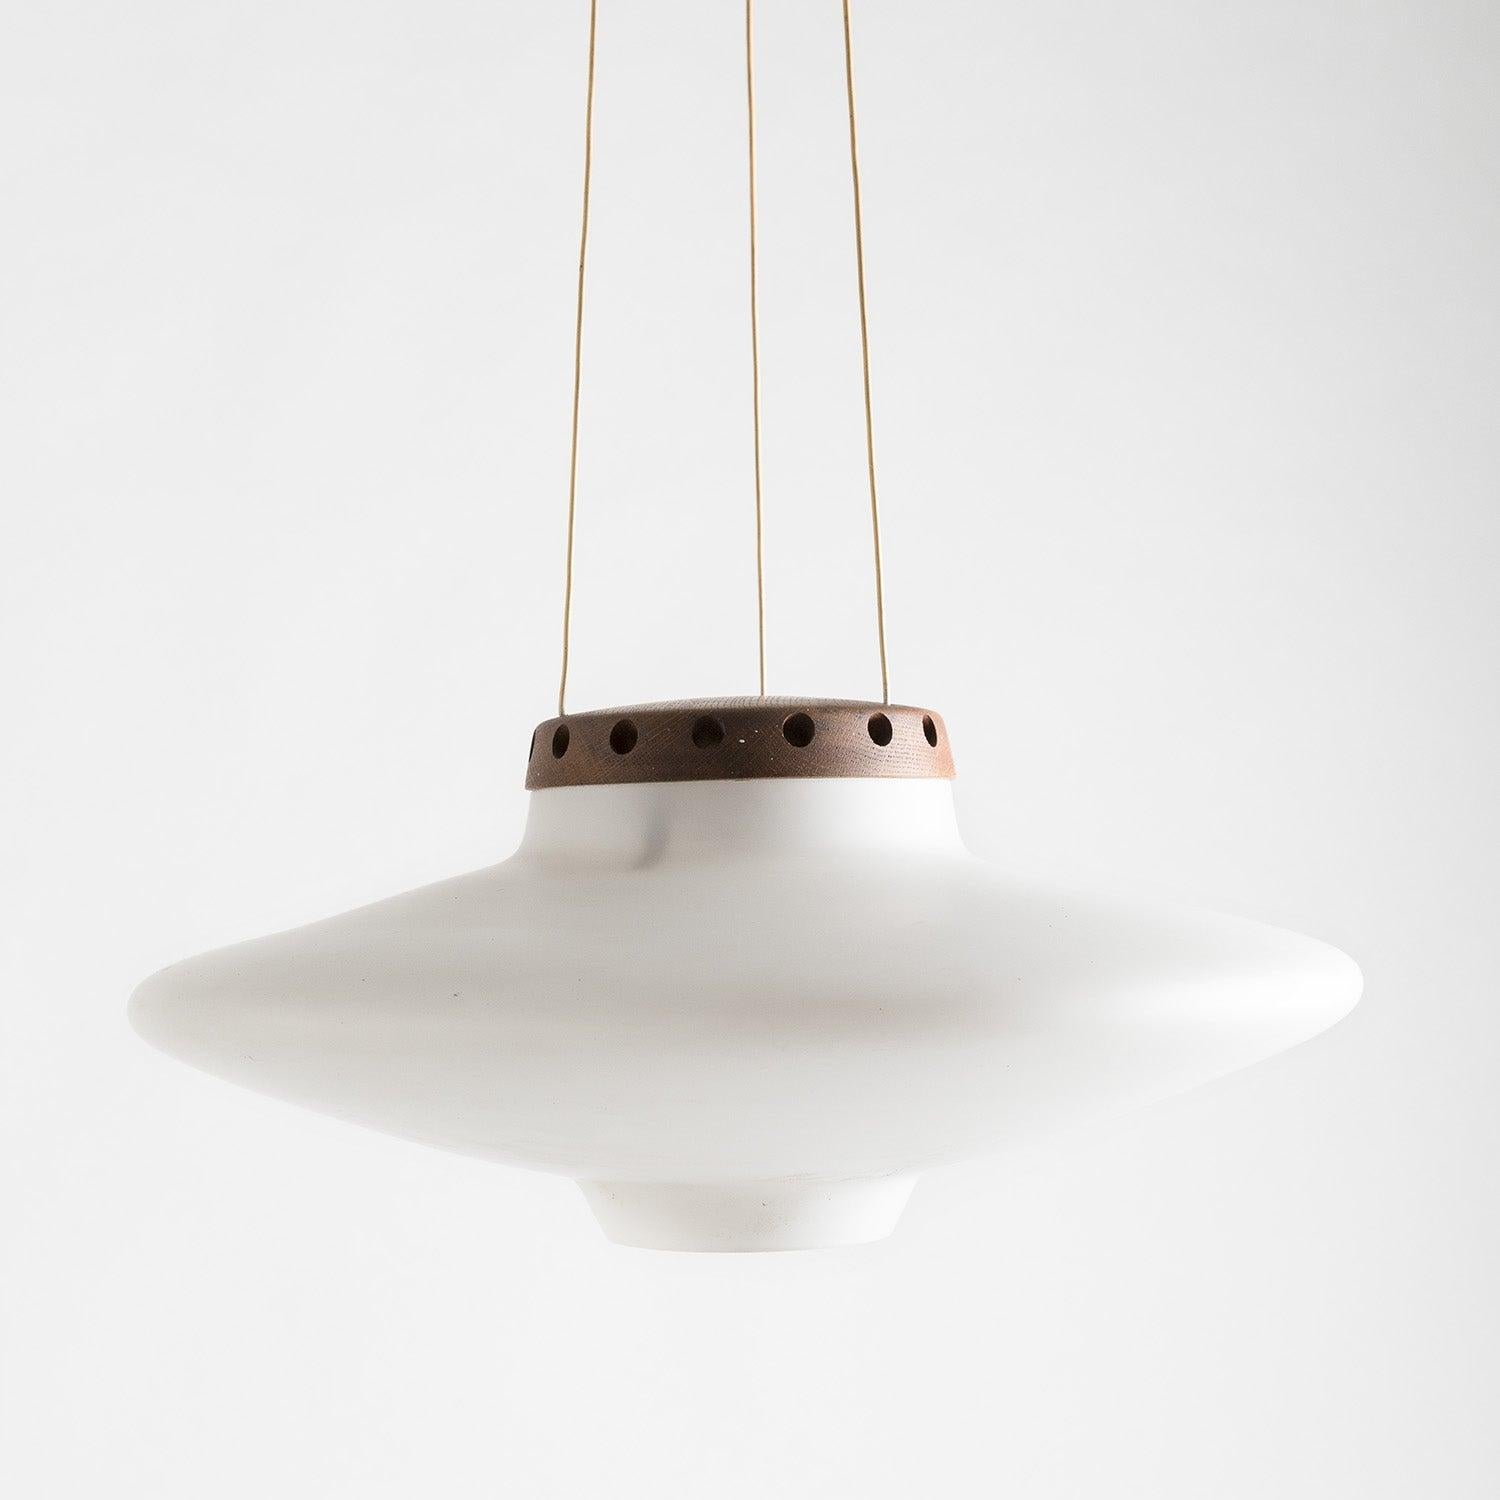 Teak wood and white opaline glass pendant, manufactured by Luxus in Sweden in late 1950s. Original wiring, overall very good condition.